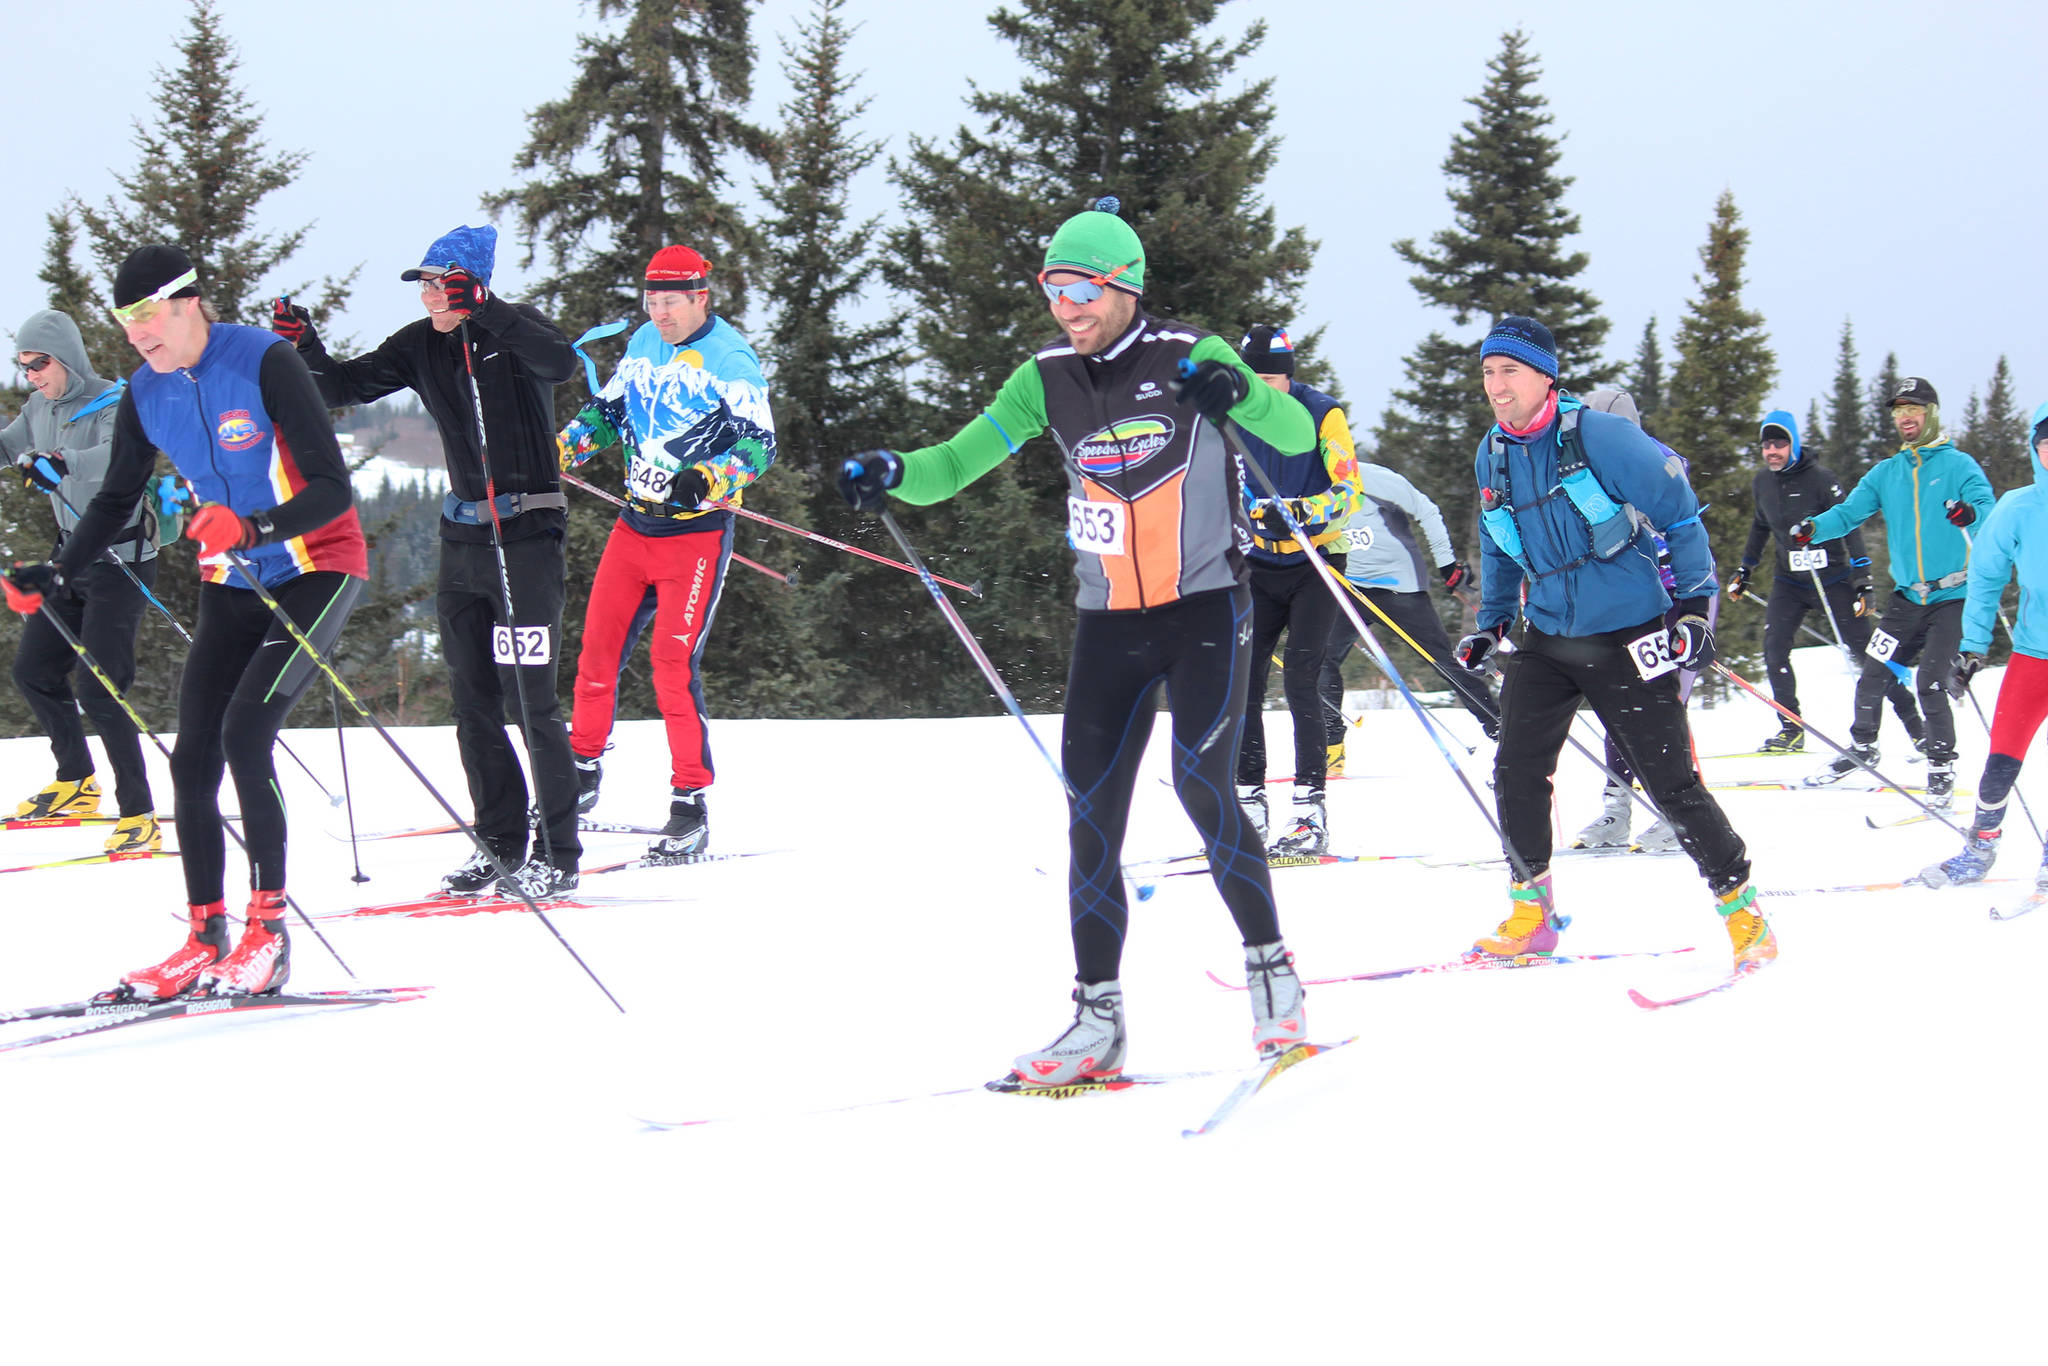 Participants in the 42 kilometer portion of the Kachemak Nordic Ski Marathon take off from the starting line Saturday, March 9, 2019 at the Lookout Mountain Trails near Homer, Alaska. The 42k race actually had to be shortened to 38k when a portion of the trail was lost in the bad weather. (Photo by Megan Pacer/Homer News)